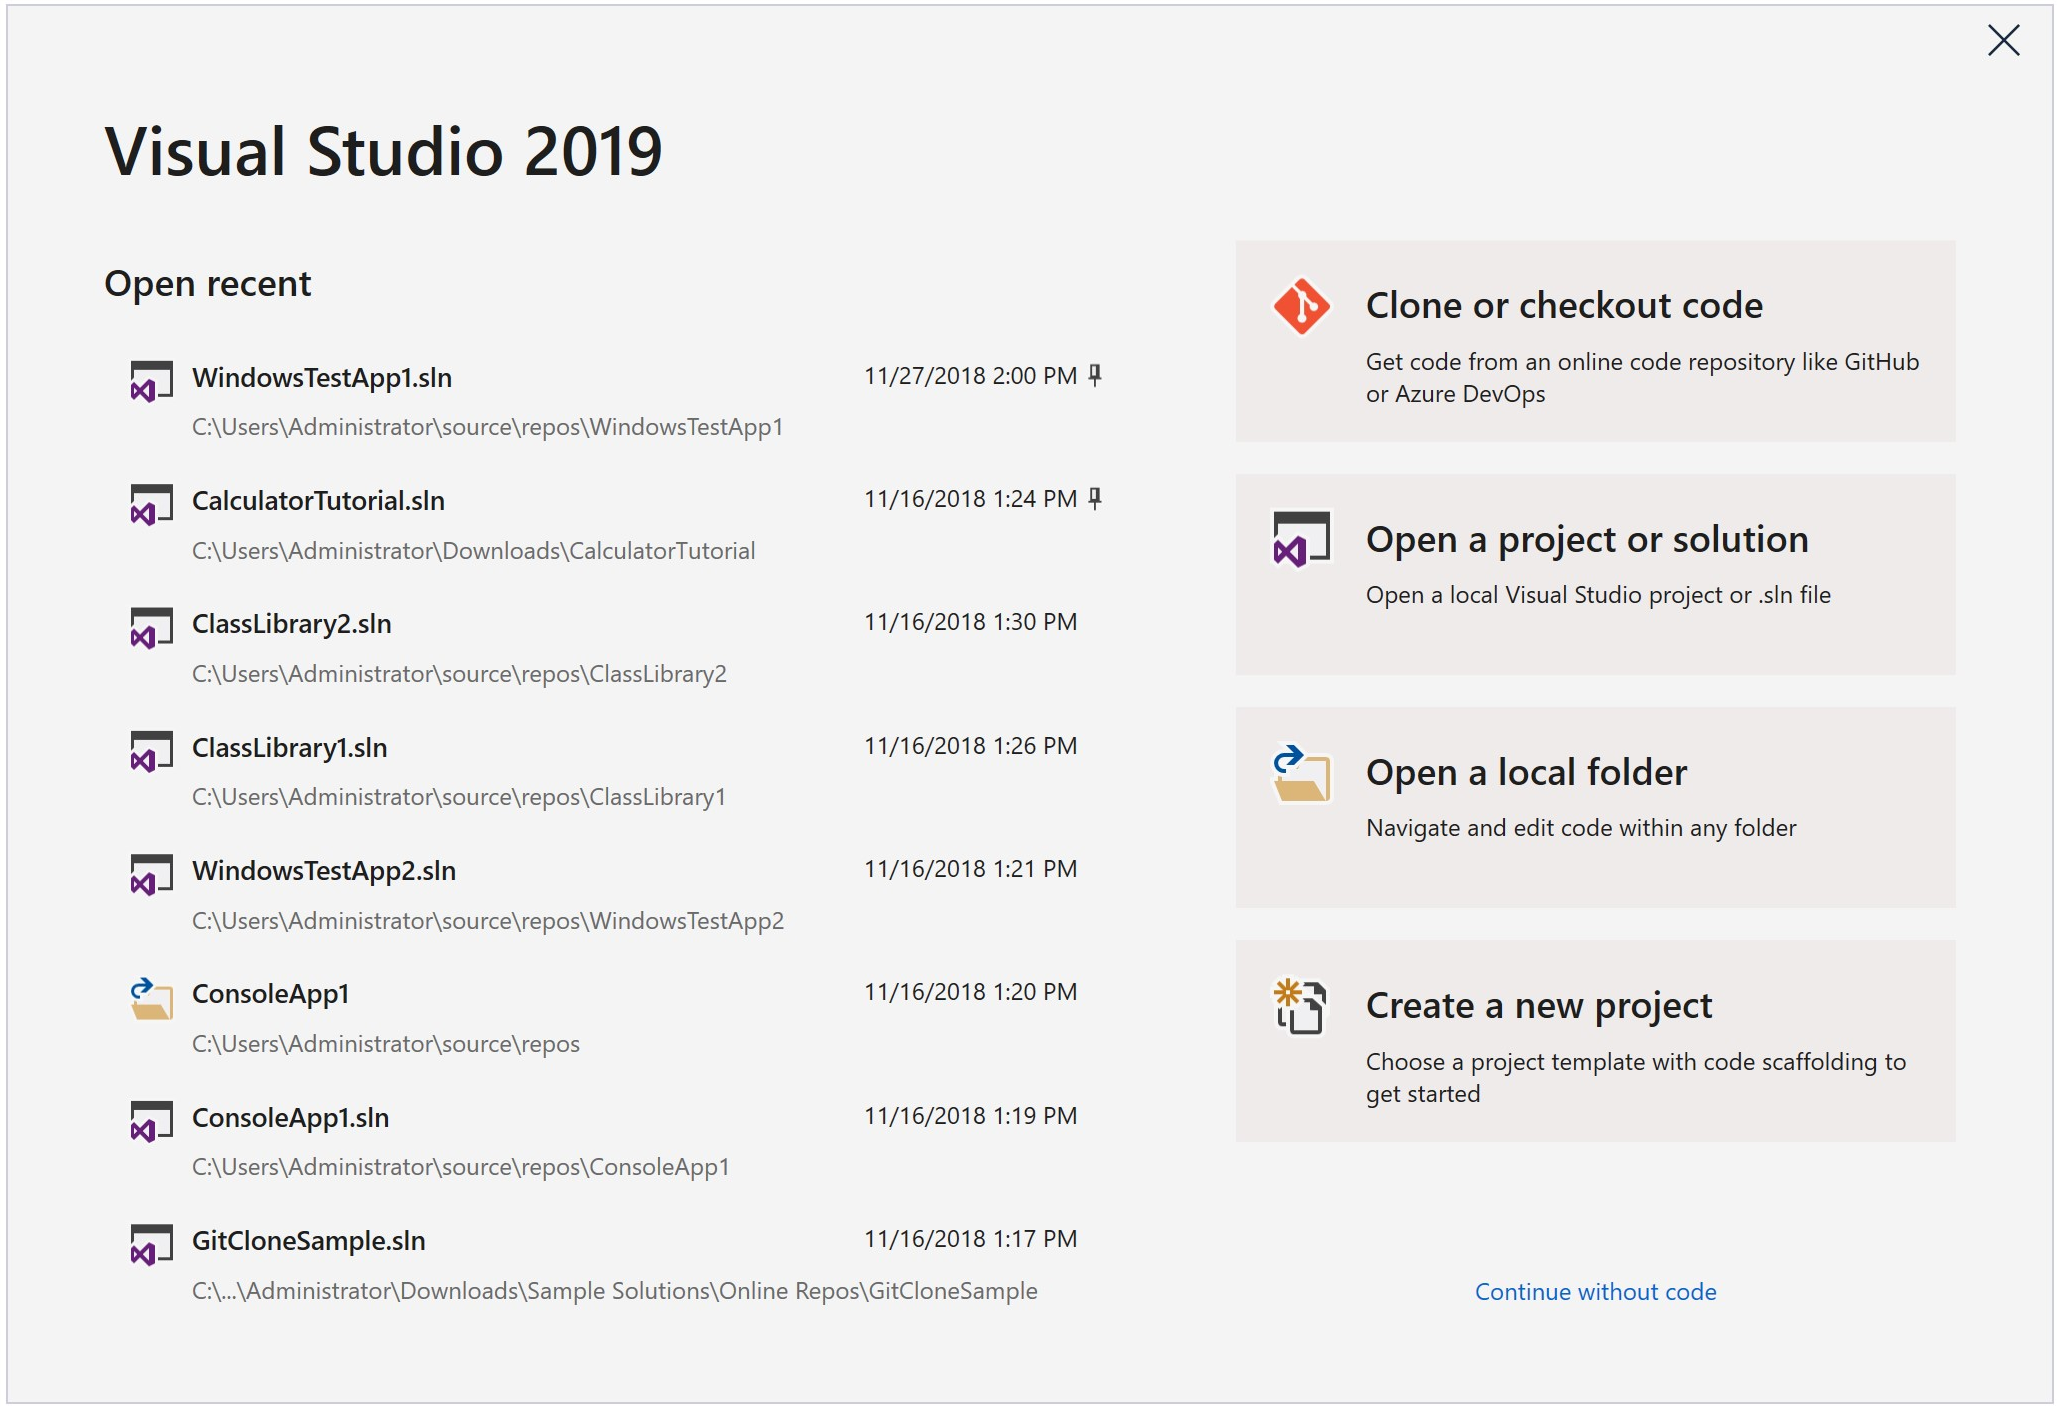 does visual studio for mac have same features as windows visual studio??